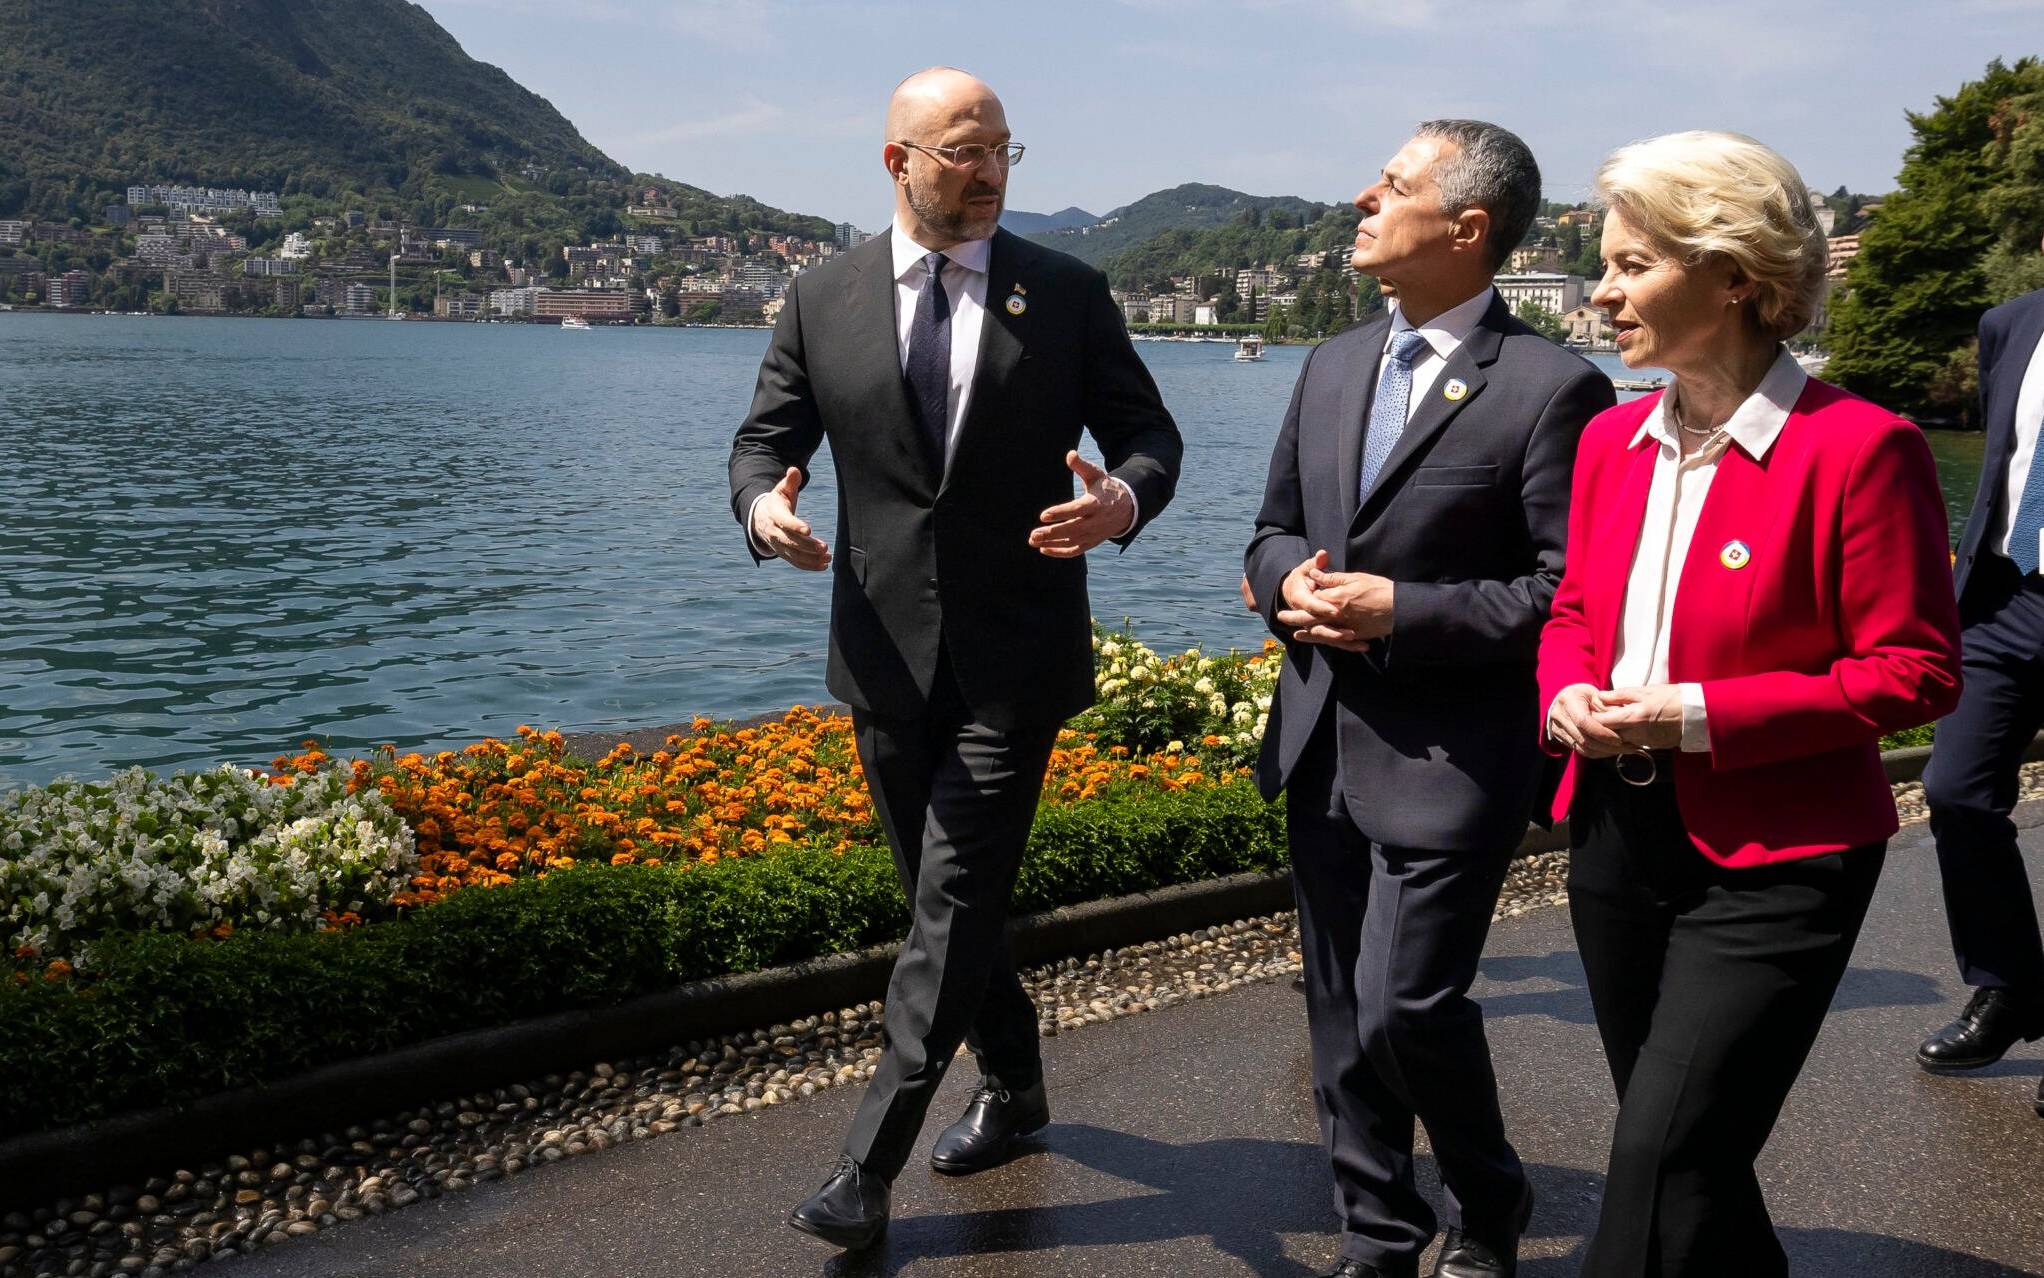 President of the Swiss Confederation Ignazio Cassis (2ndL), Ukrainian Prime Minister Denys Shmyhal (L) and Ursula von der Leyen, President of the European Commission talk before the start of the two-day Ukraine Recovery Conference in Lugano, Switzerland, on July 4, 2022. - Ministers from dozens of countries and international organisations leaders are expected to gather in the southern Swiss city of Lugano with the aim of providing a roadmap for the war-ravaged country's recovery. (Photo by MICHAEL BUHOLZER / POOL / AFP)